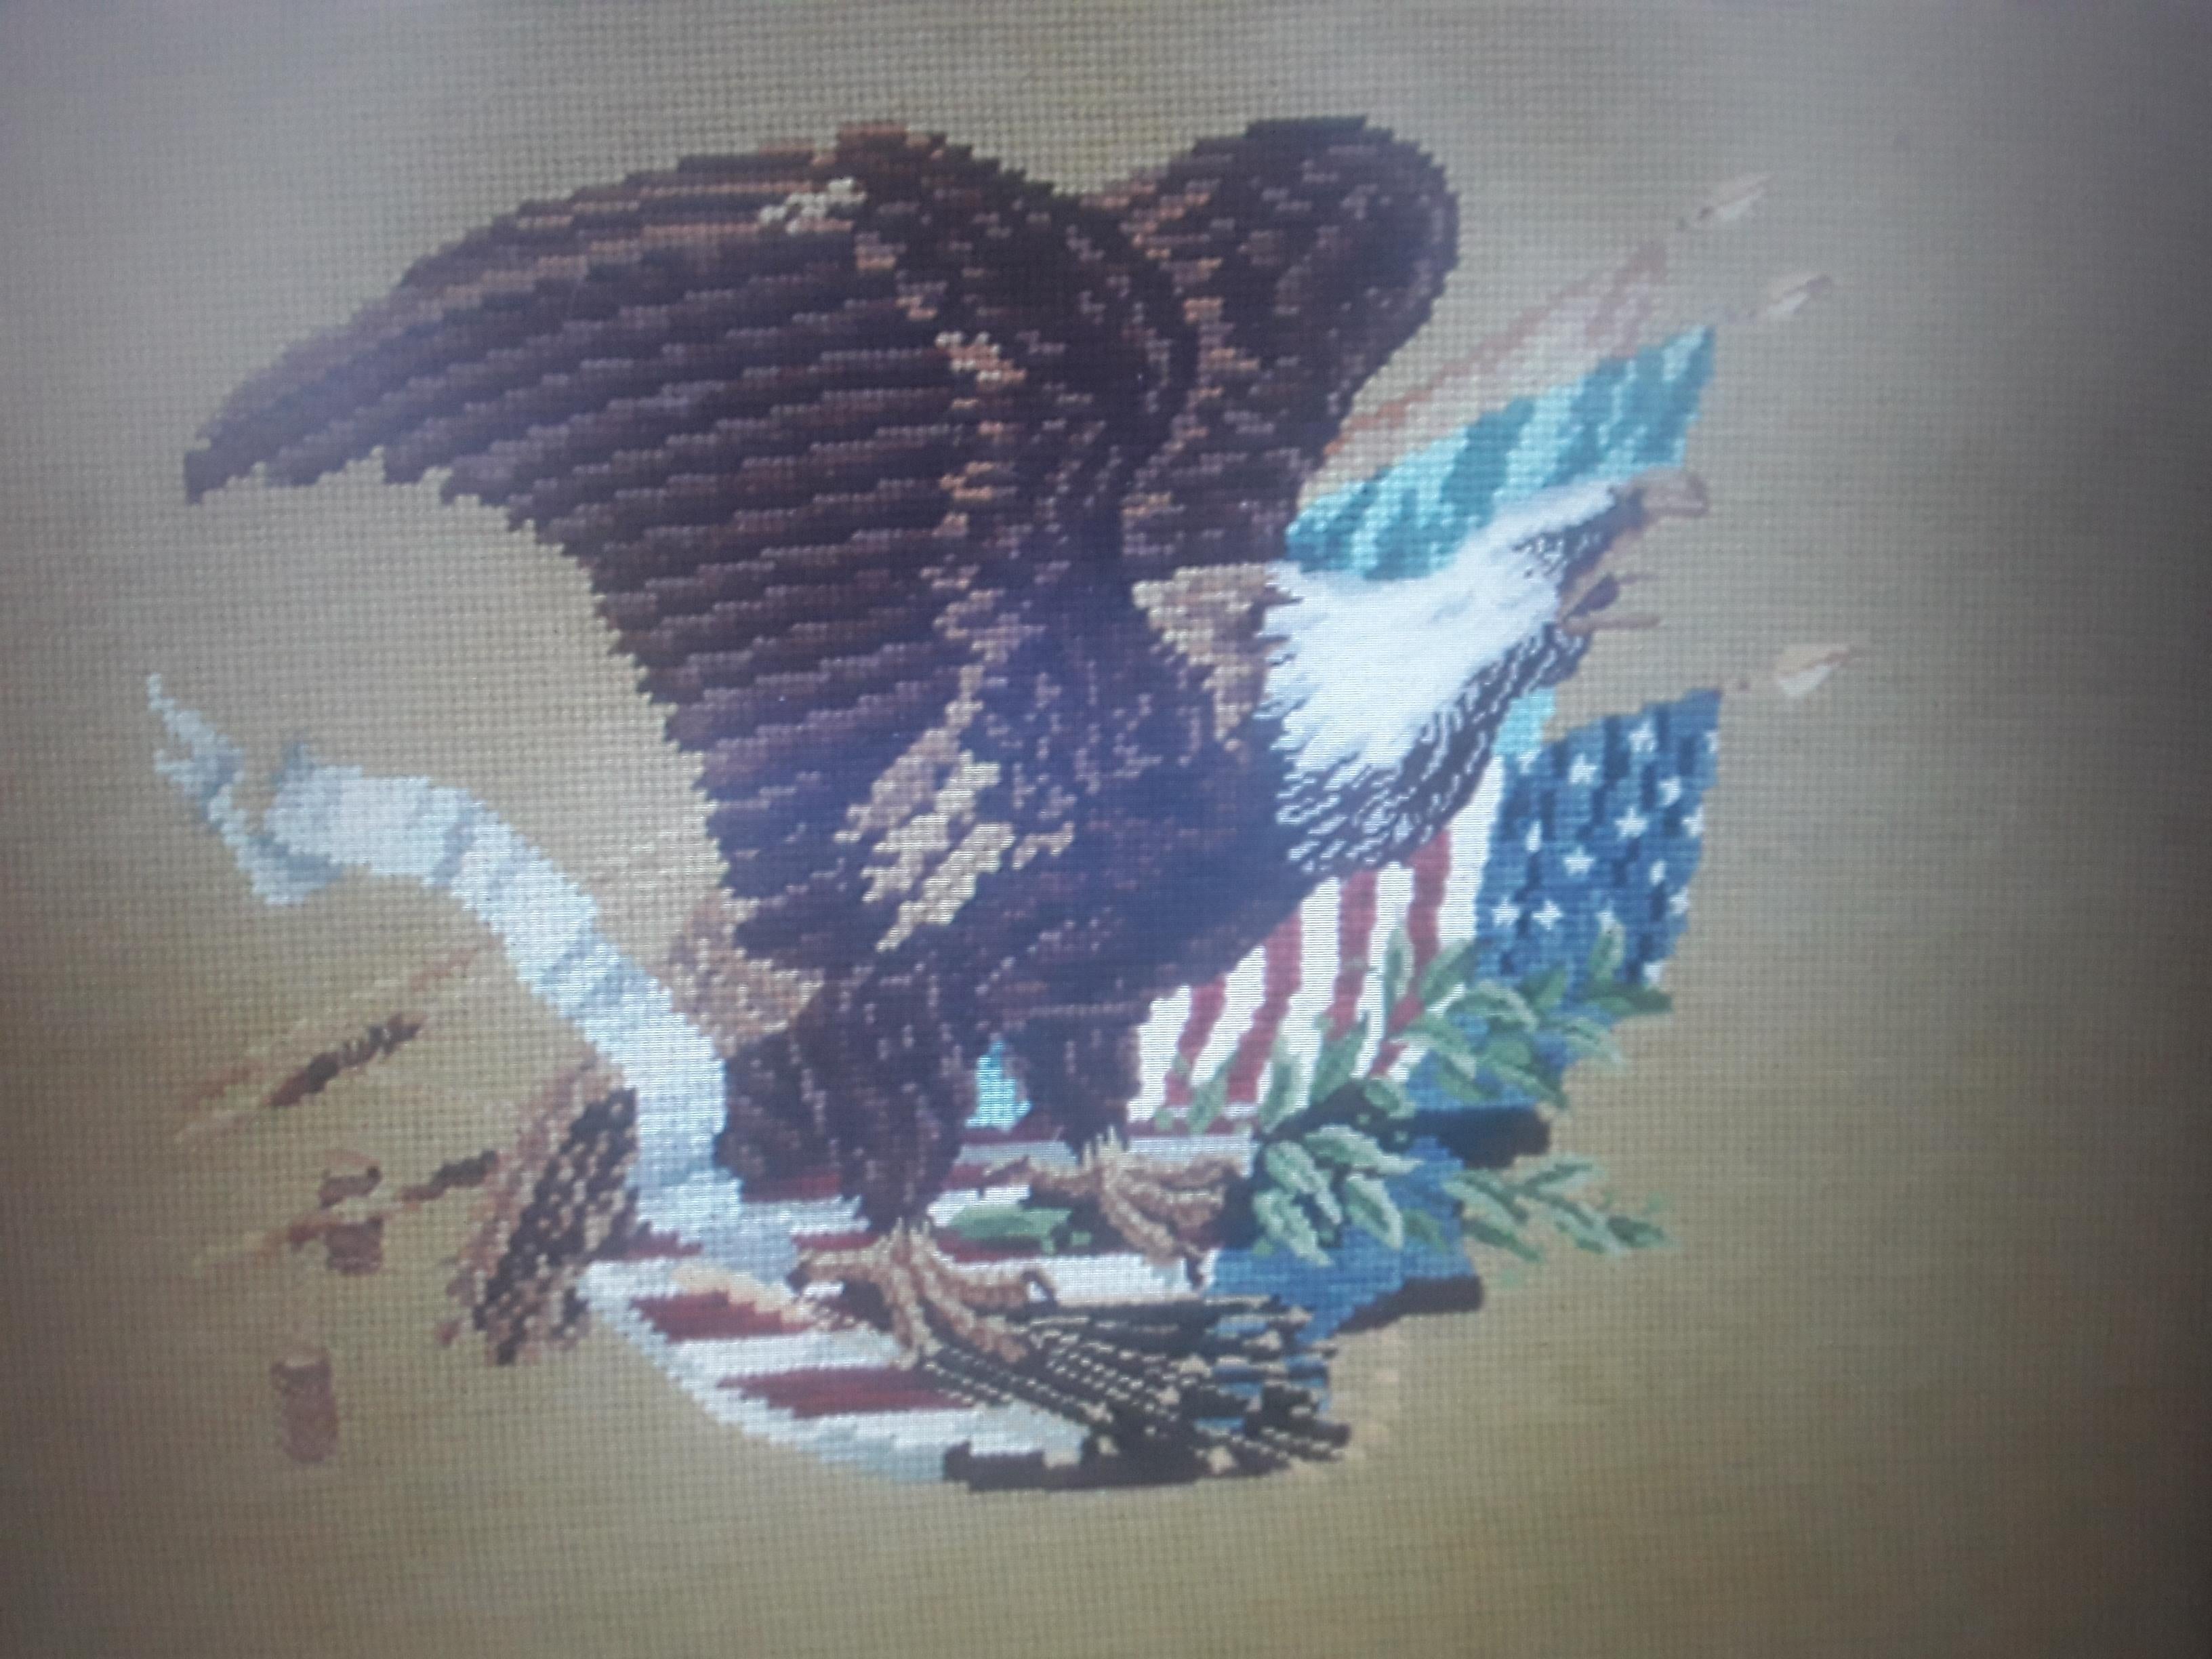 1940's Vintage Hand Stitched and Framed Needlepoint Eagle Scene U.S.A. Patriotic In Good Condition For Sale In Opa Locka, FL